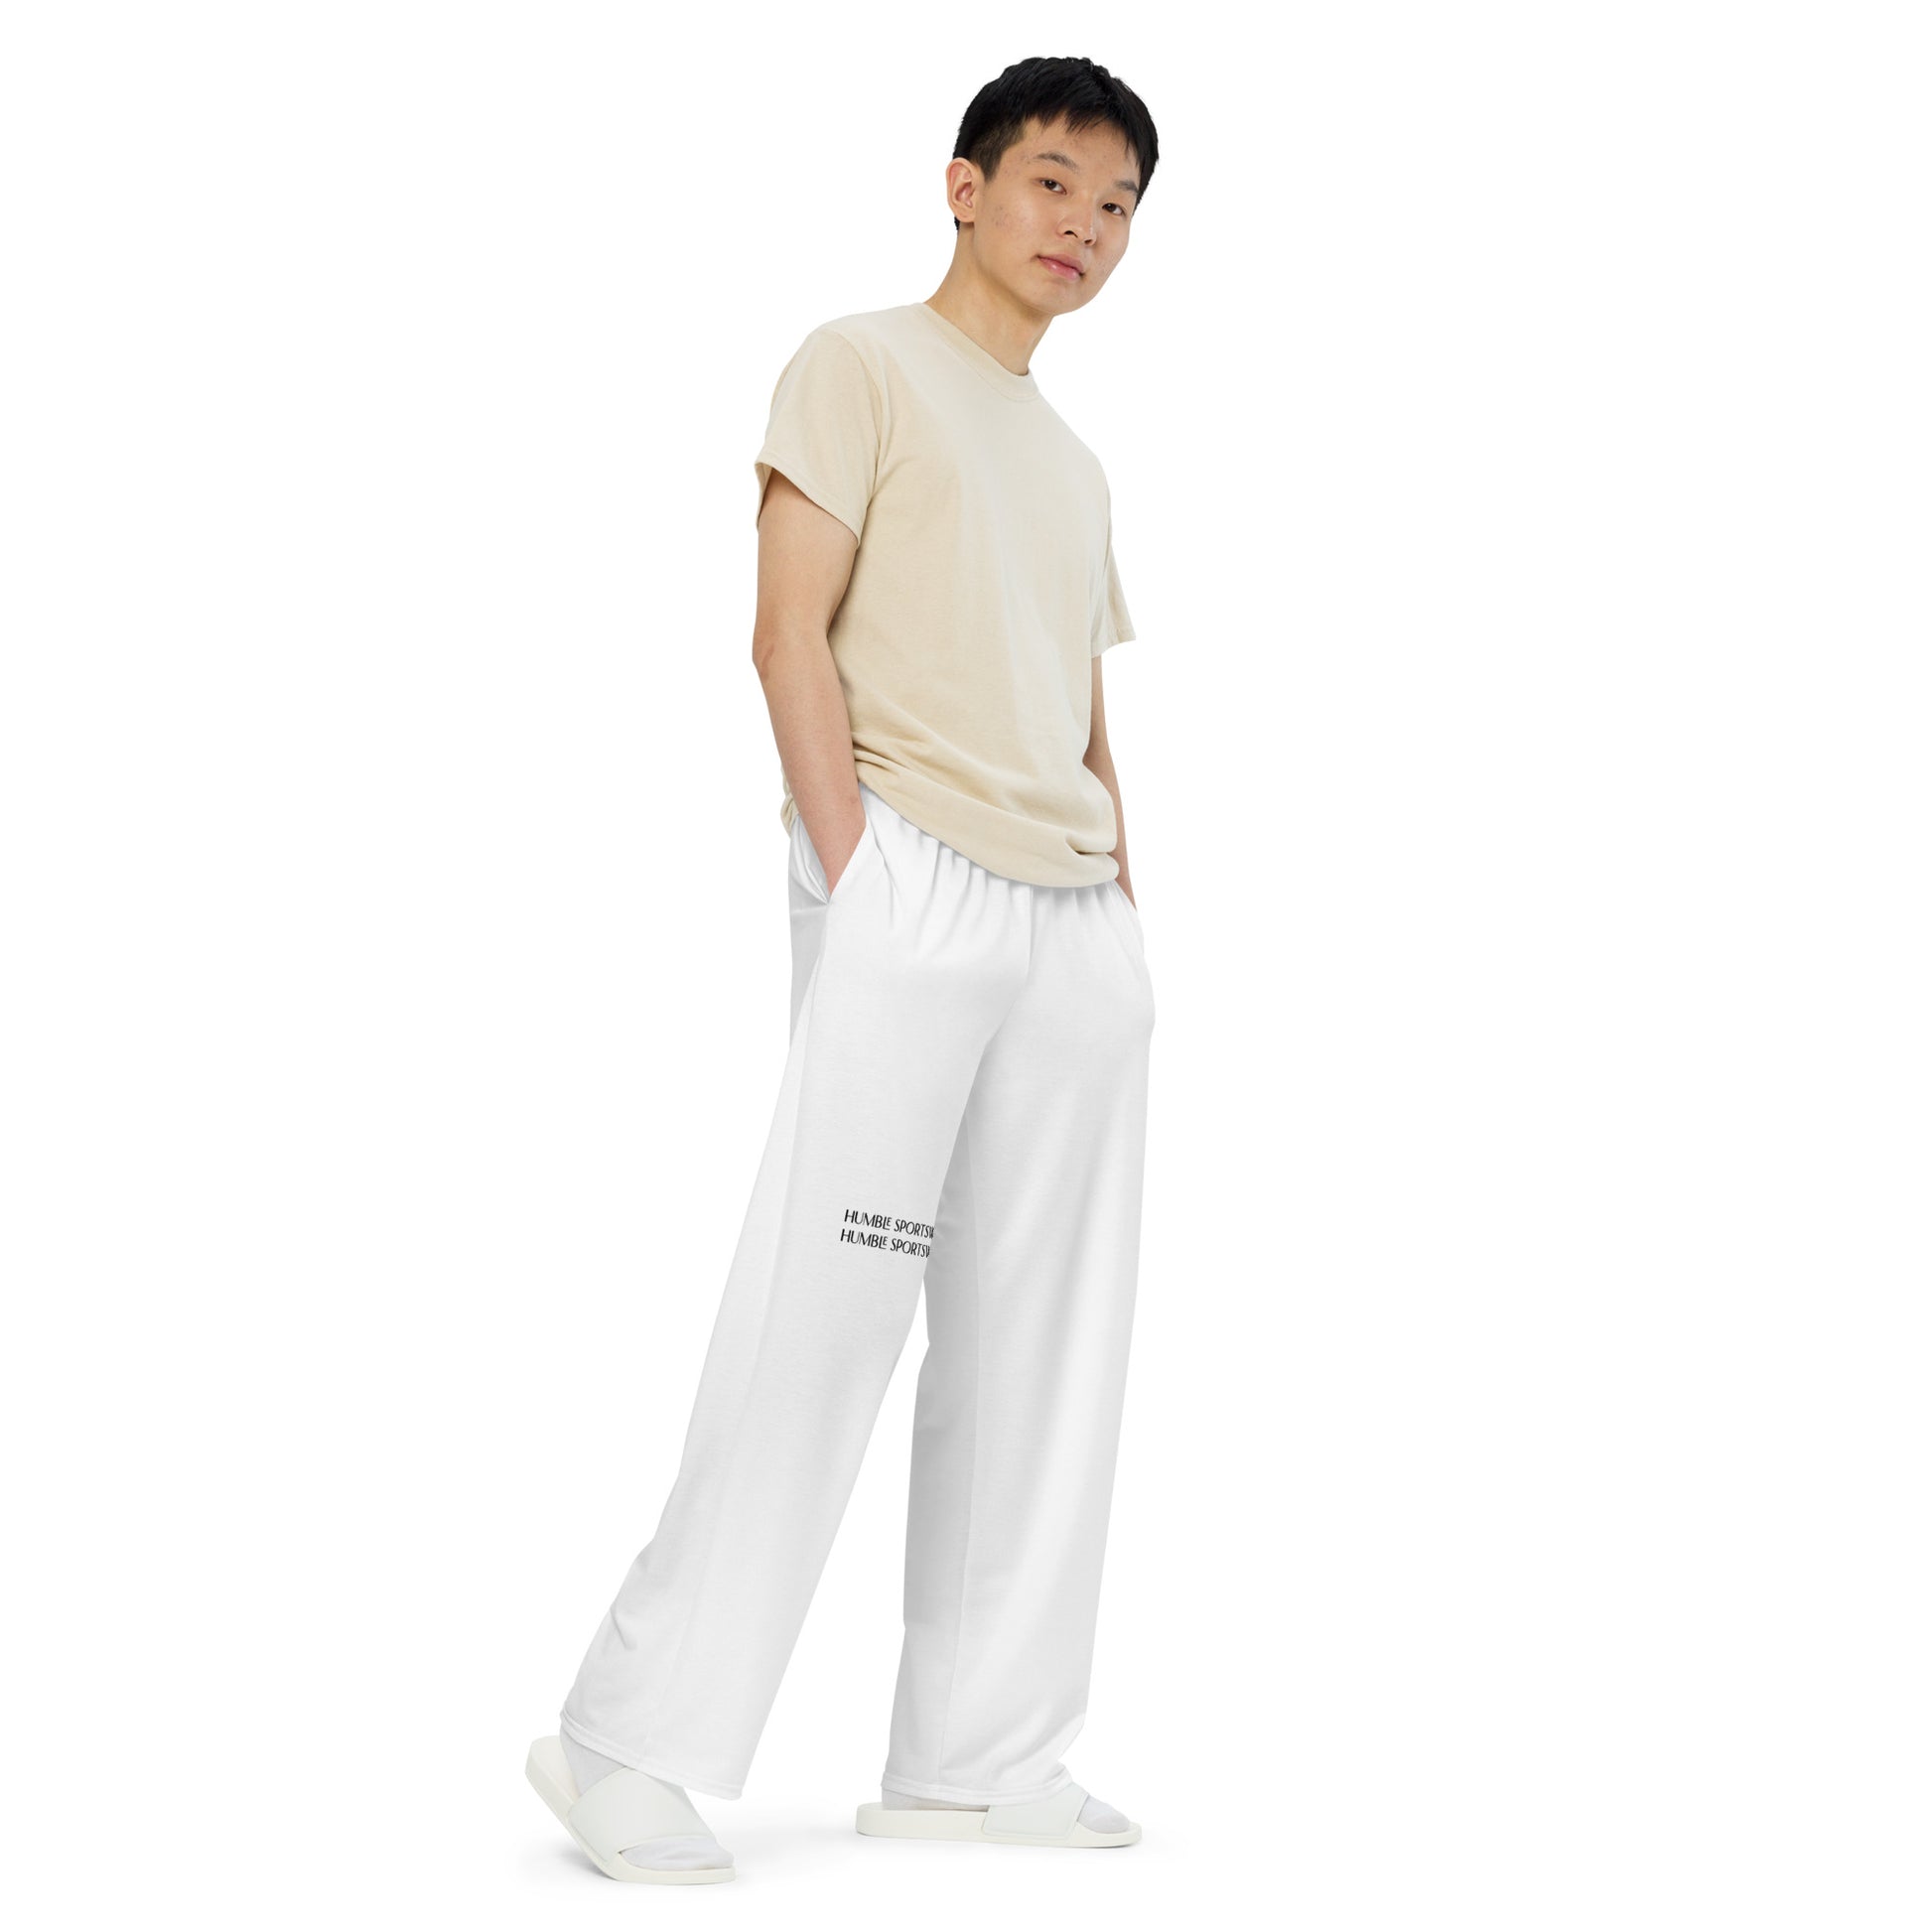 Humble Sportswear, men's color match white activewear and loungewear pants 